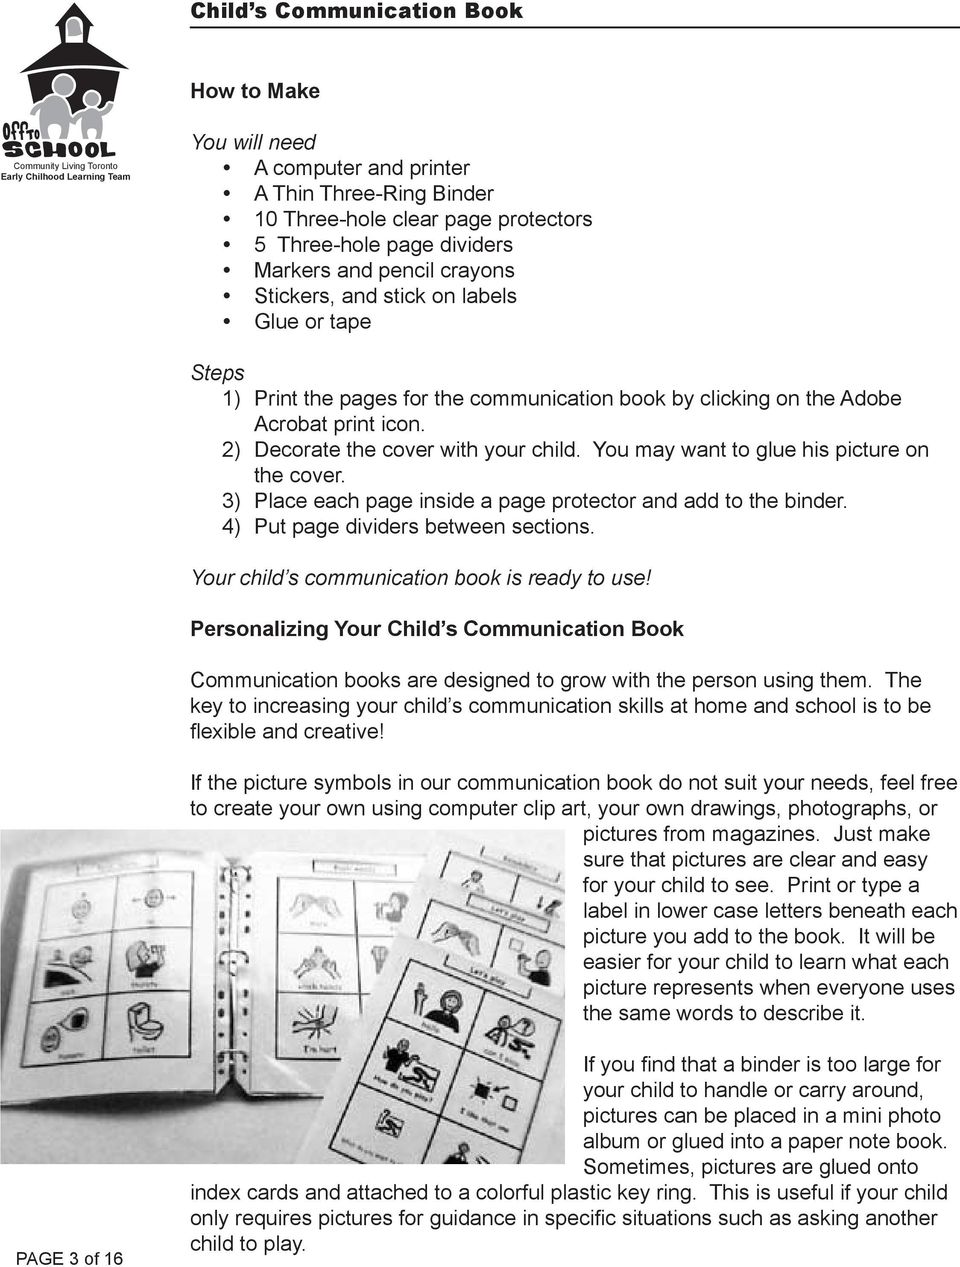 3) Place each page inside a page protector and add to the binder. 4) Put page dividers between sections. Your child s communication book is ready to use!